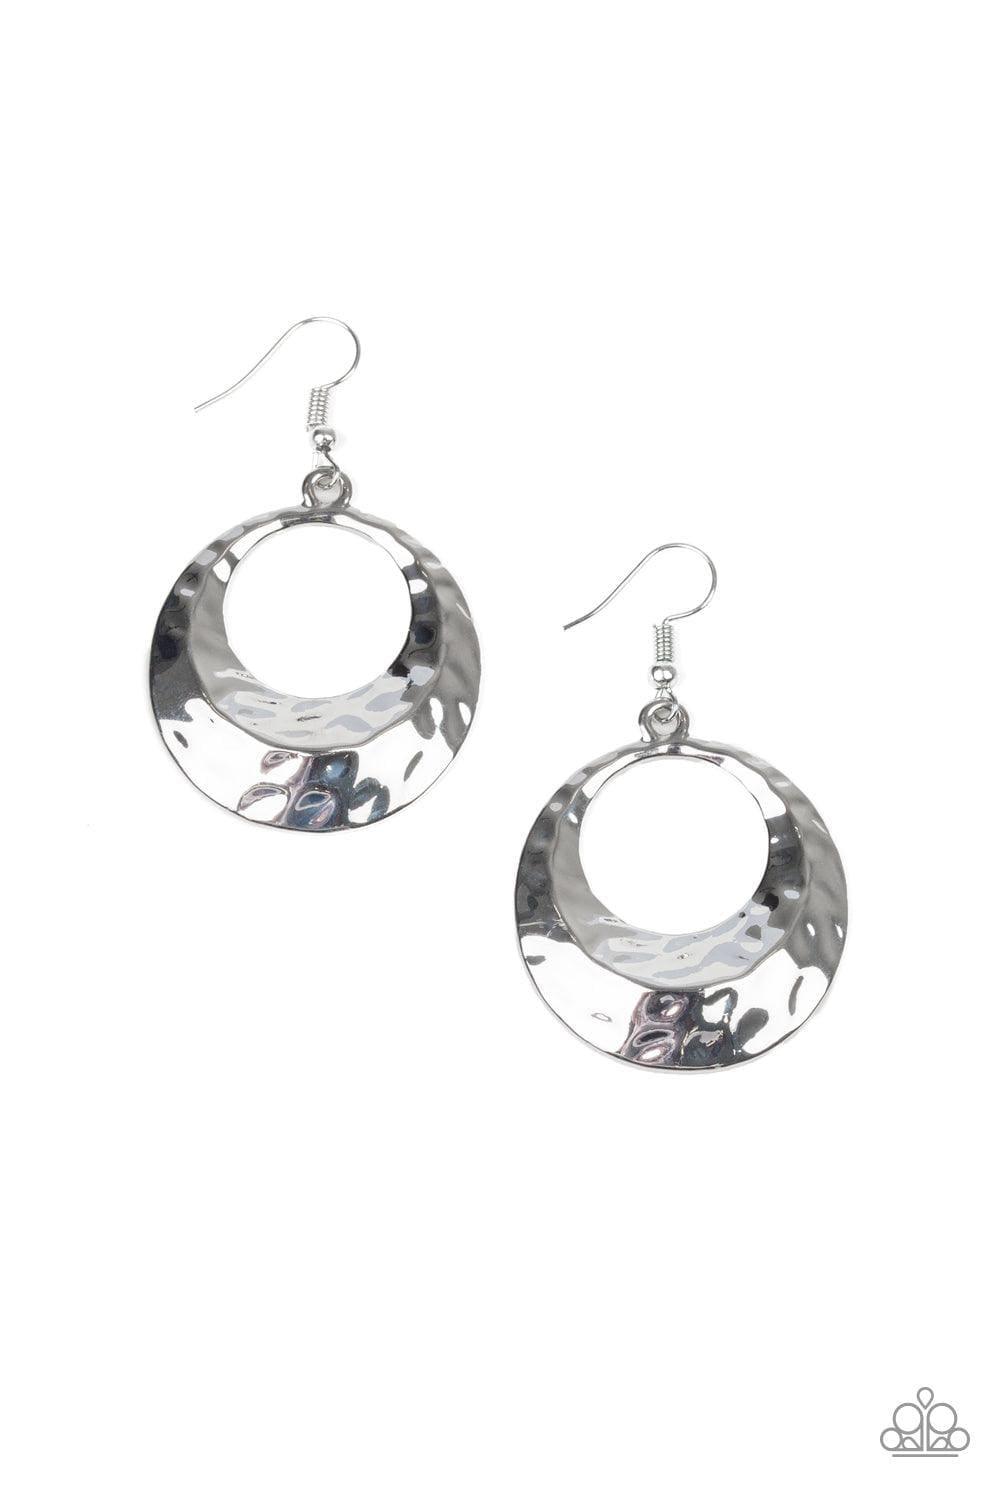 Paparazzi Accessories - Savory Shimmer - Silver Earrings - Bling by JessieK